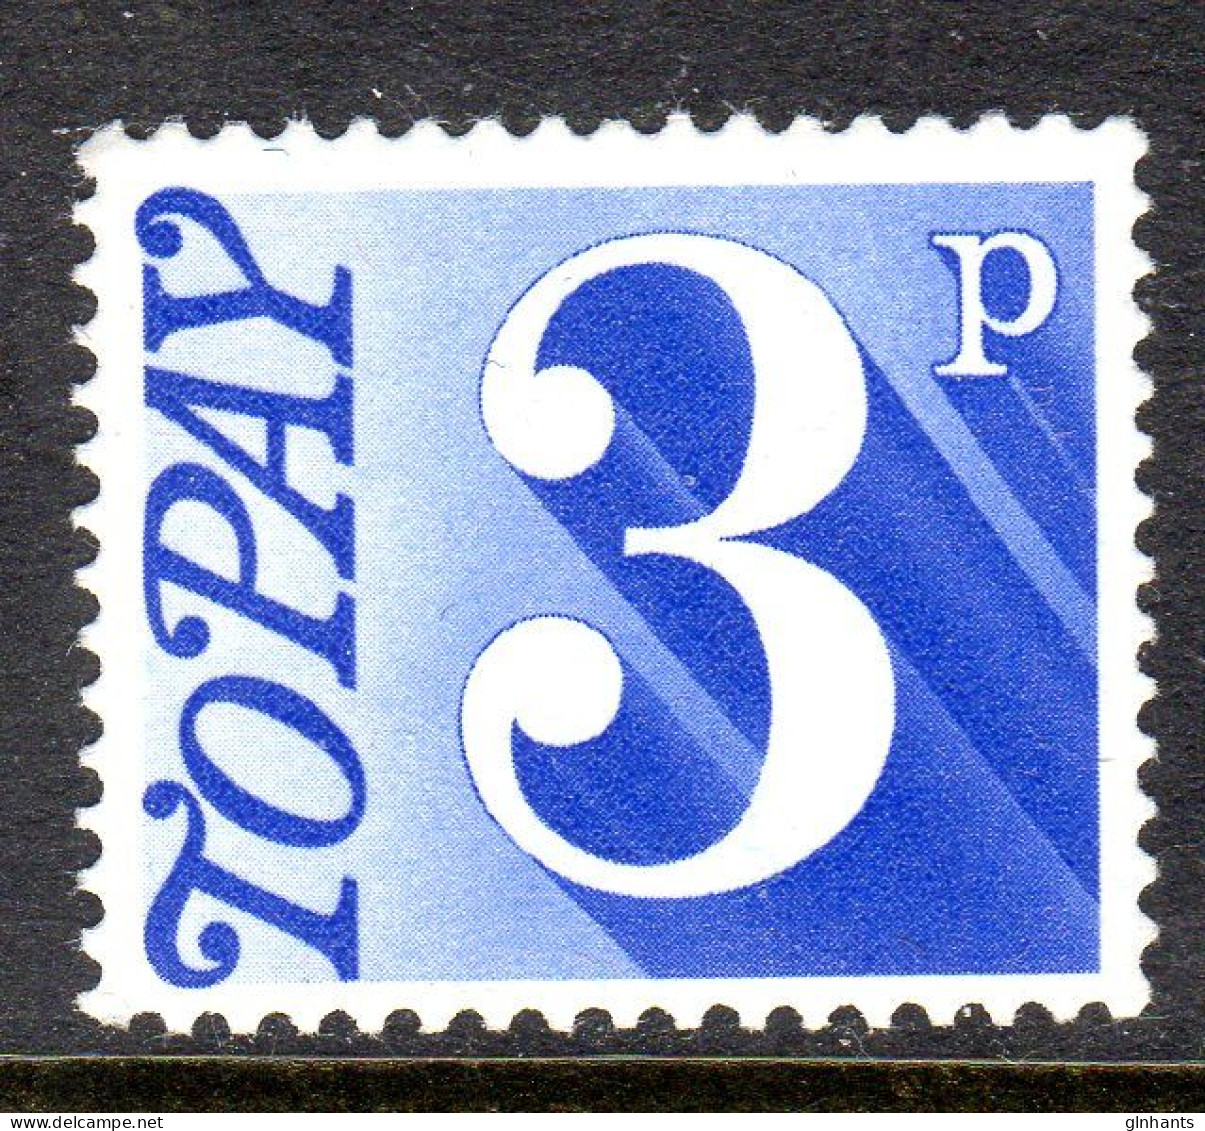 GREAT BRITAIN GB - 1970 POSTAGE DUE 3p STAMP FINE MNH ** SG D80 - Taxe